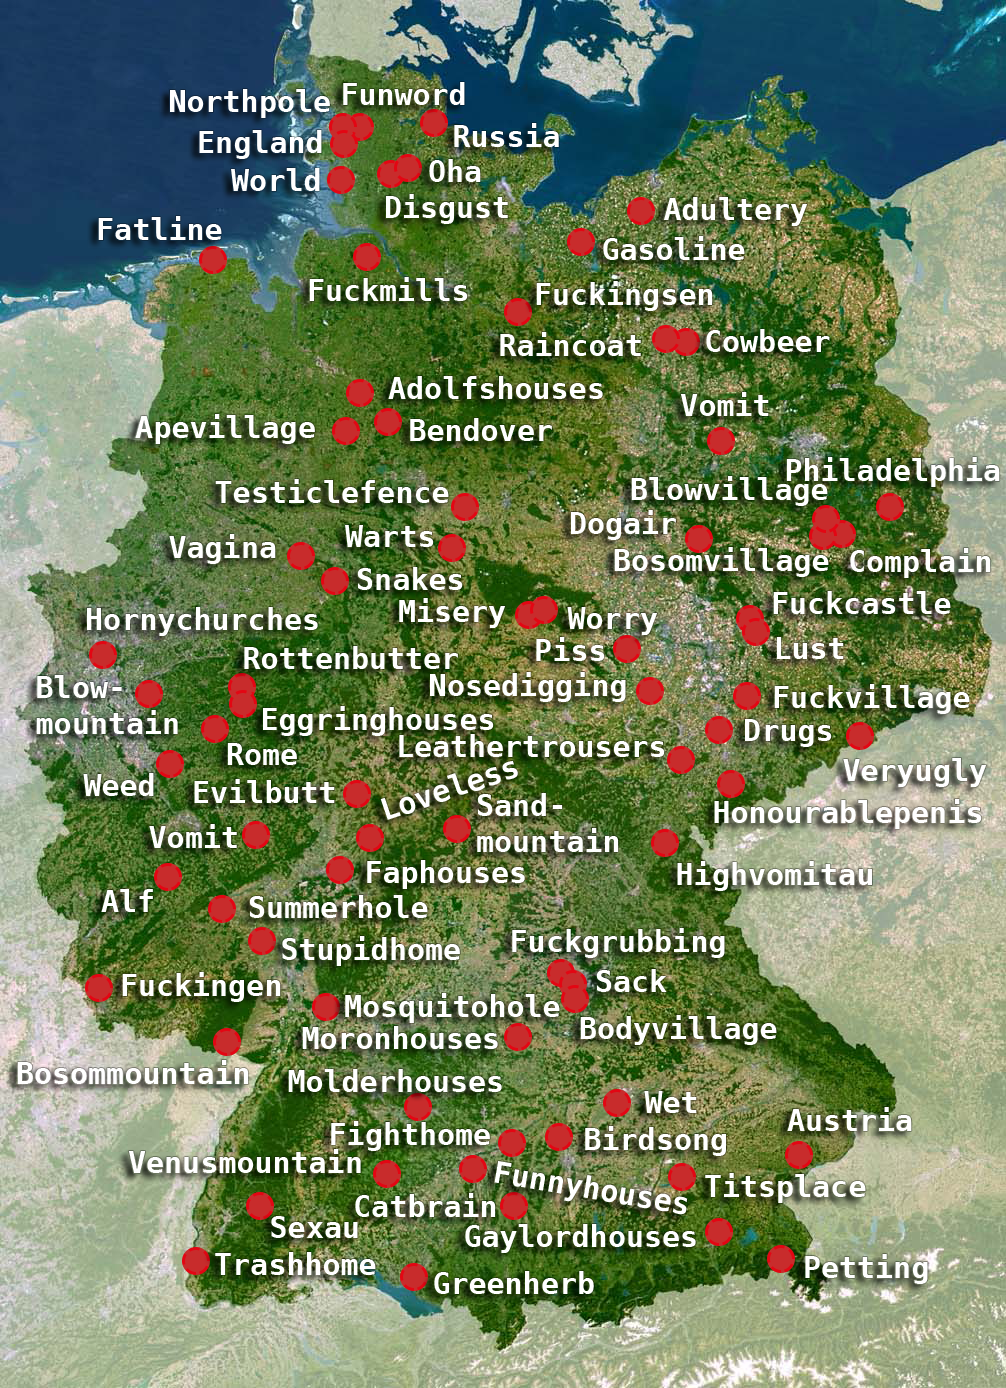 Funny names of german cities by Arminius1871 on DeviantArt